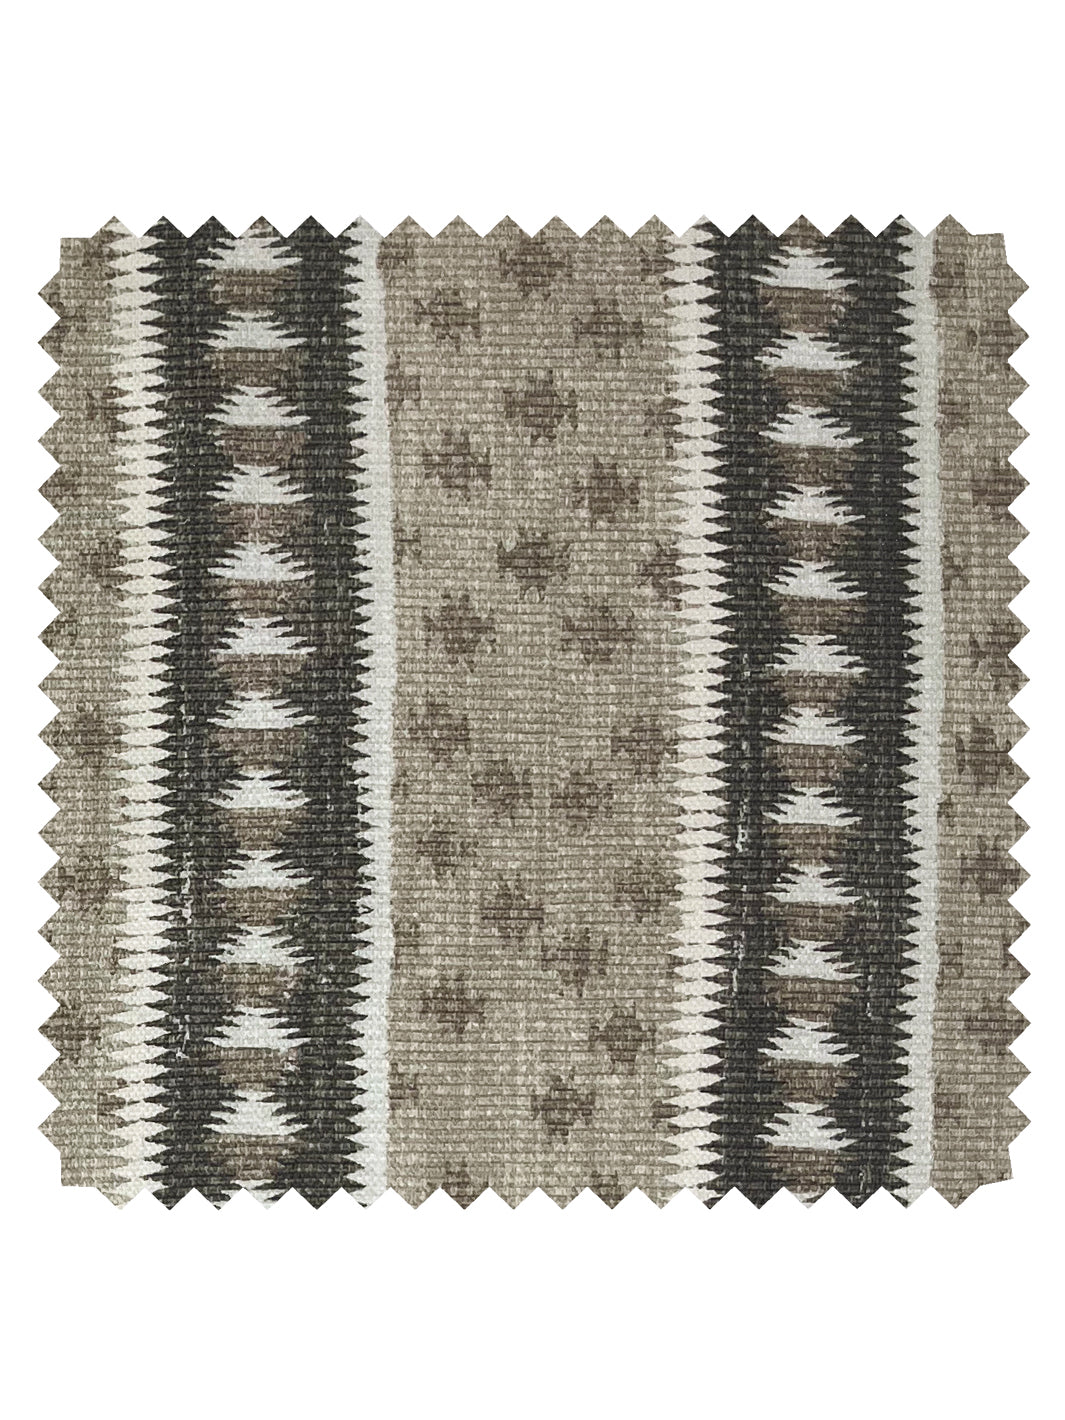 'Northstar Stripe' Linen Fabric by Nathan Turner - Brown